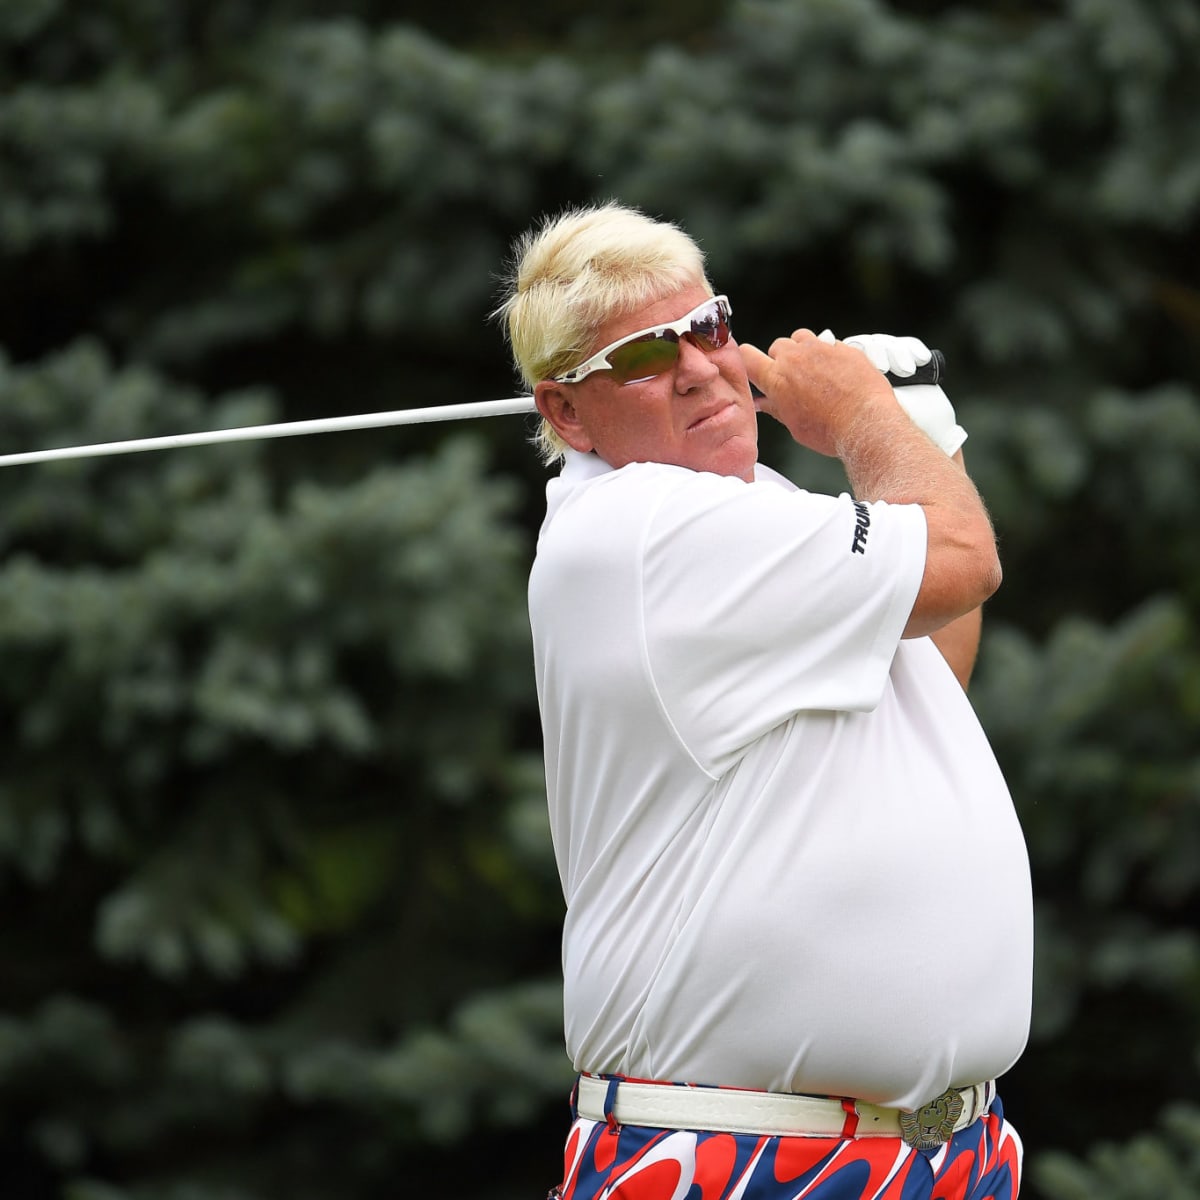 John Daly Approved To Ride In Cart At PGA Championship - The Spun: What's  Trending In The Sports World Today